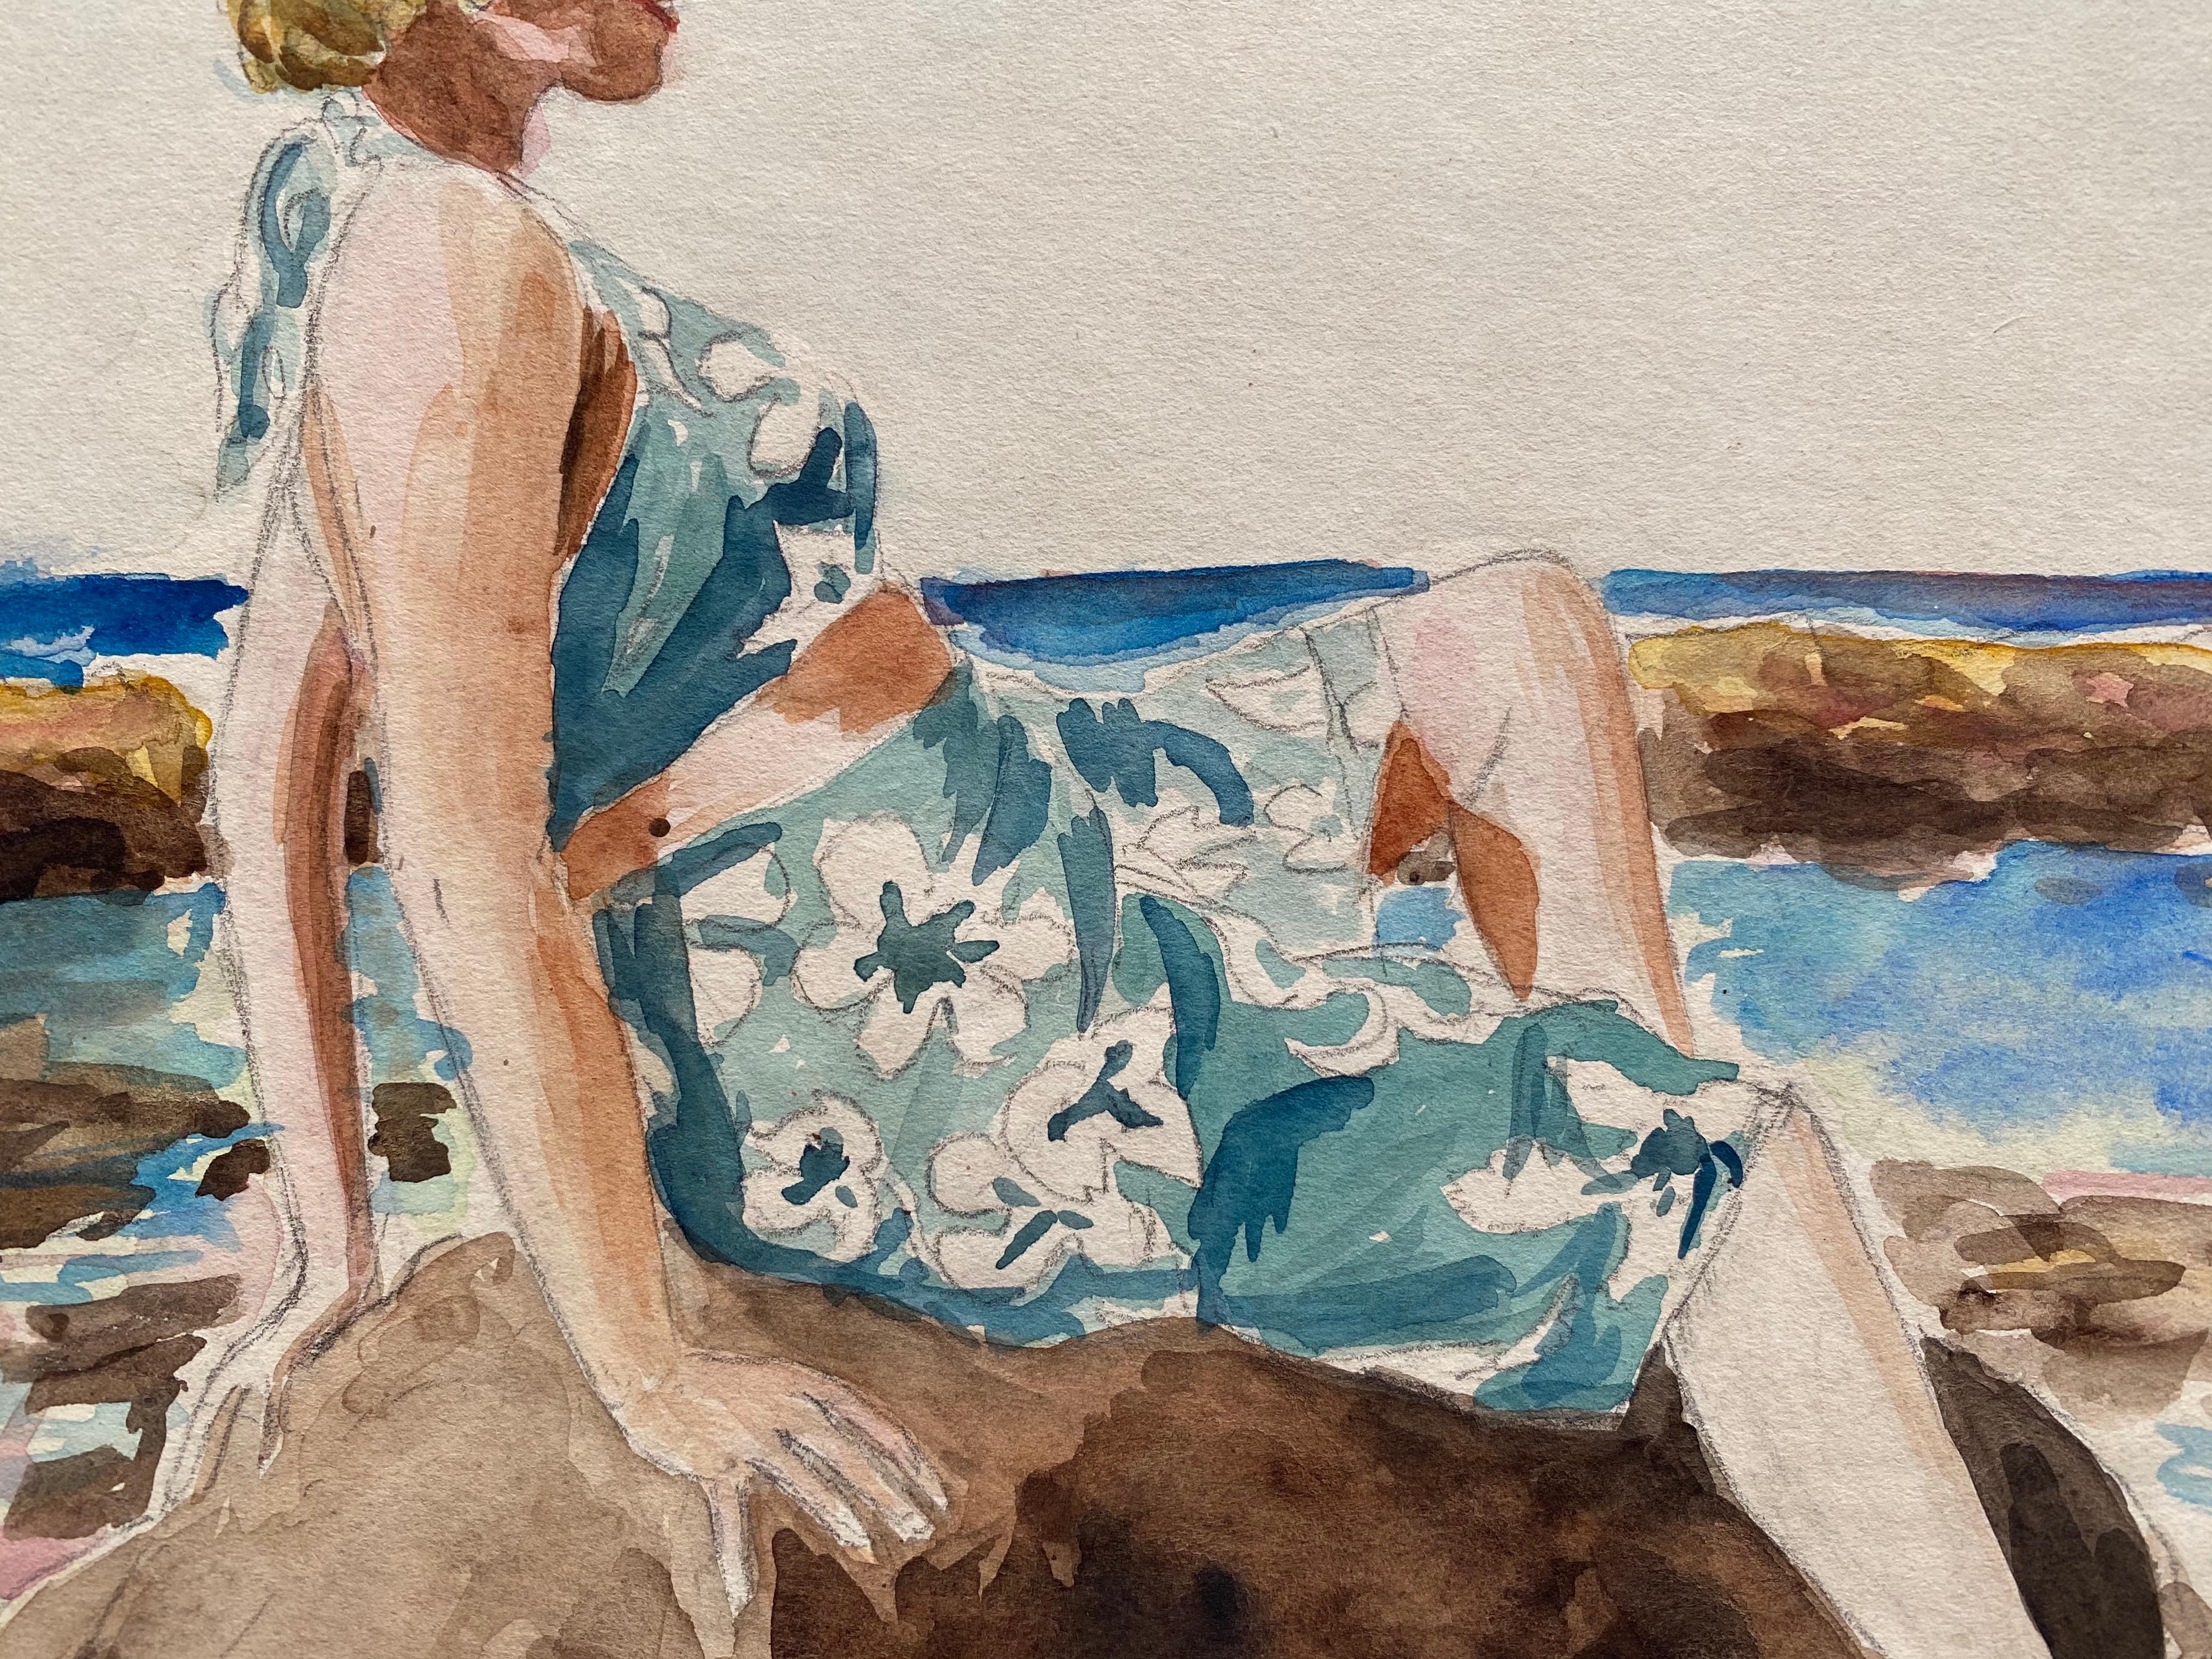 
Artist/ School: French School, EARLY 20TH CENTURY

Title: Sur la Plage

Medium: watercolour on artists paper

Size: painting: 8 x 10 inches
        
Provenance: private collection, France

Condition: The painting is in very good condition. 